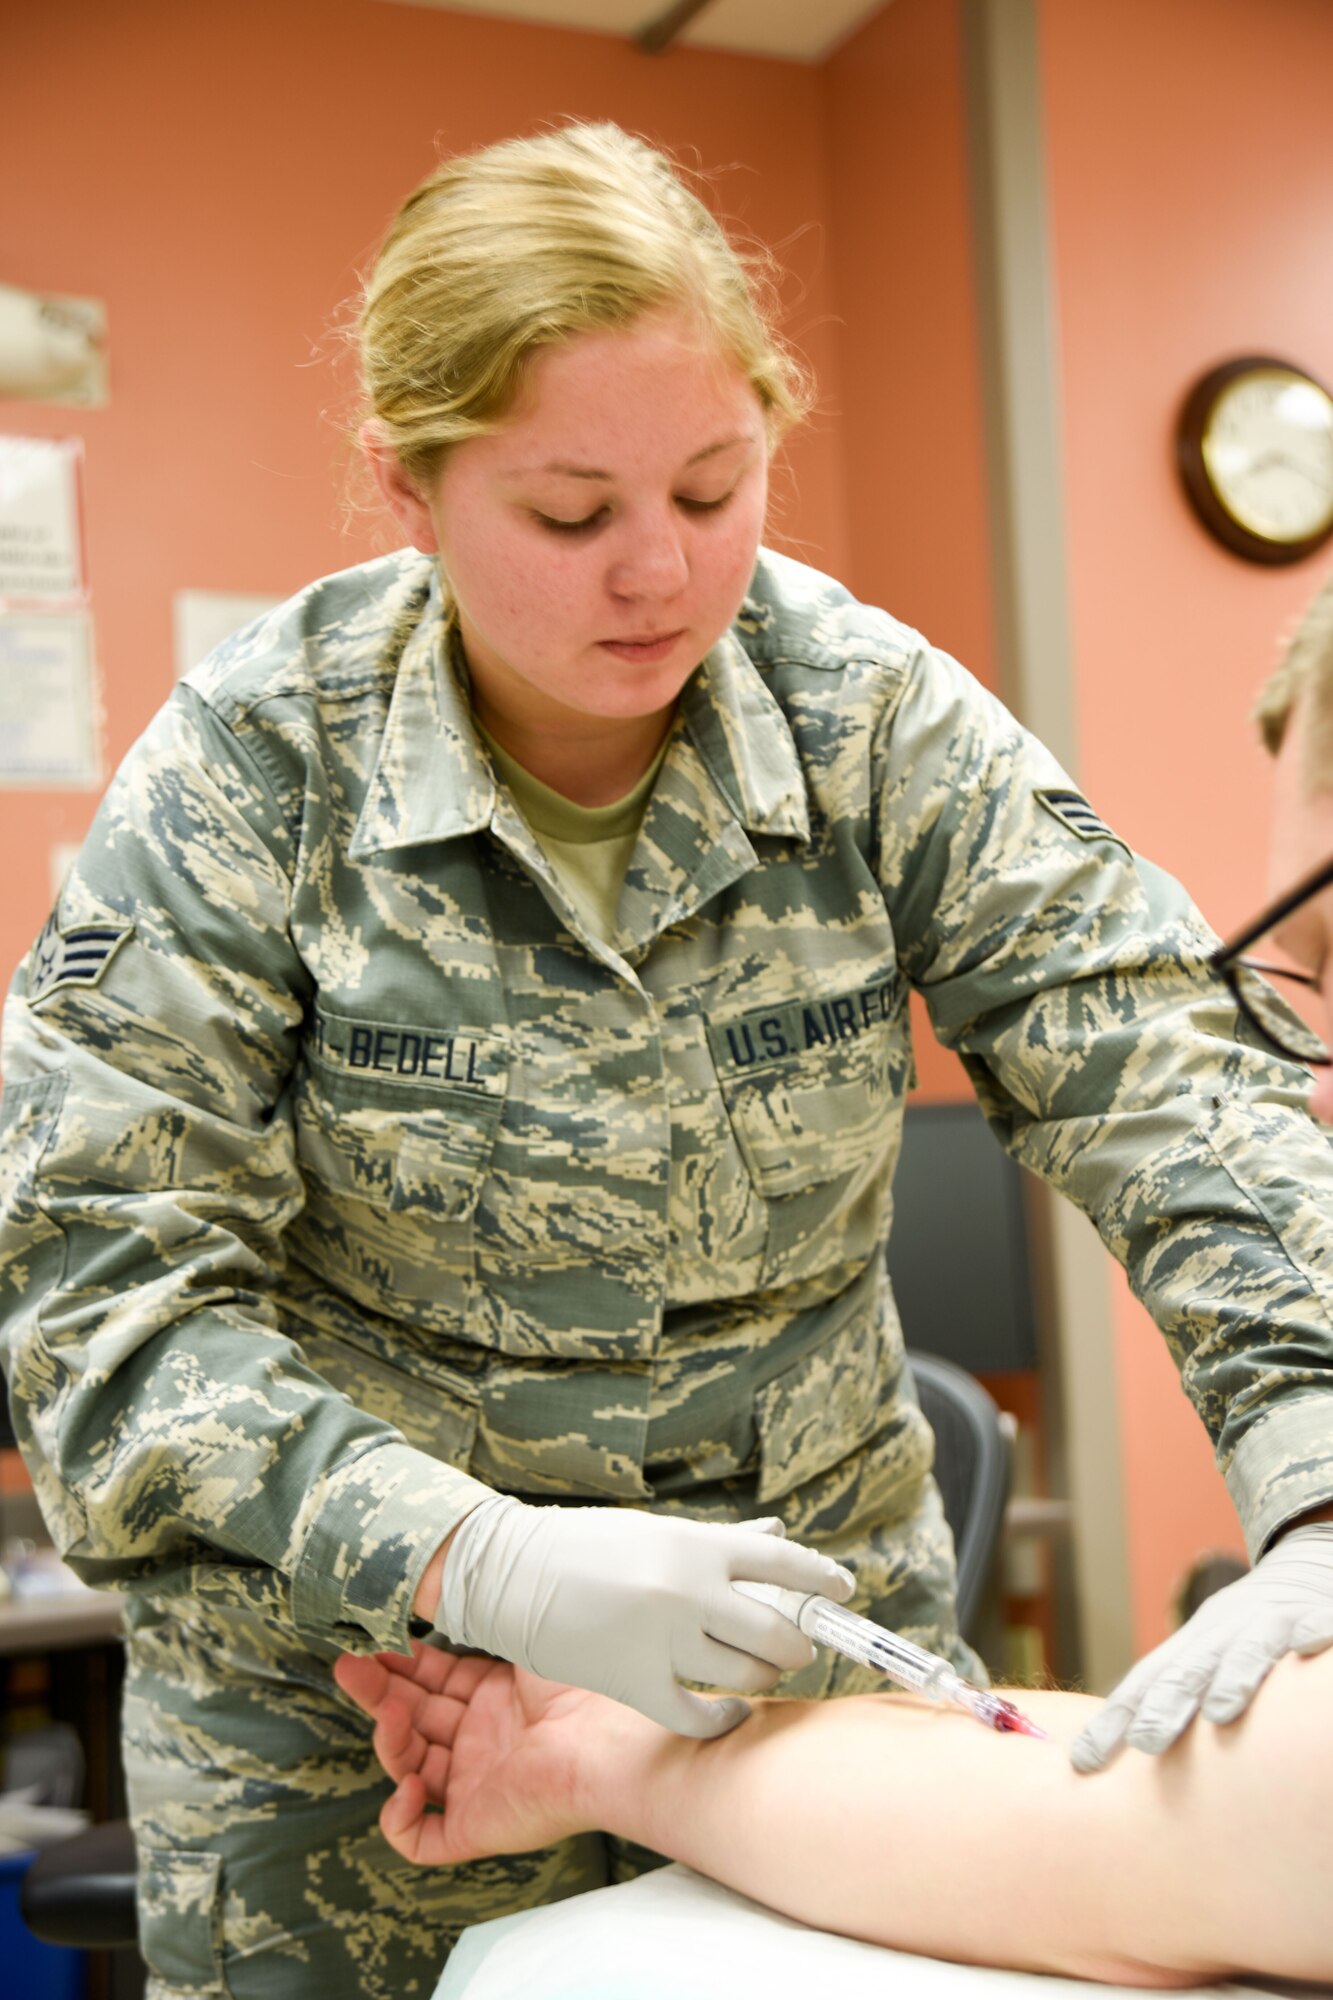 Senior Airman Kaydra Hart-Bedell inserts an IV on a patient at the Tripler Army Medical Center emergency room Jan. 17, 2018, Honolulu, HI.